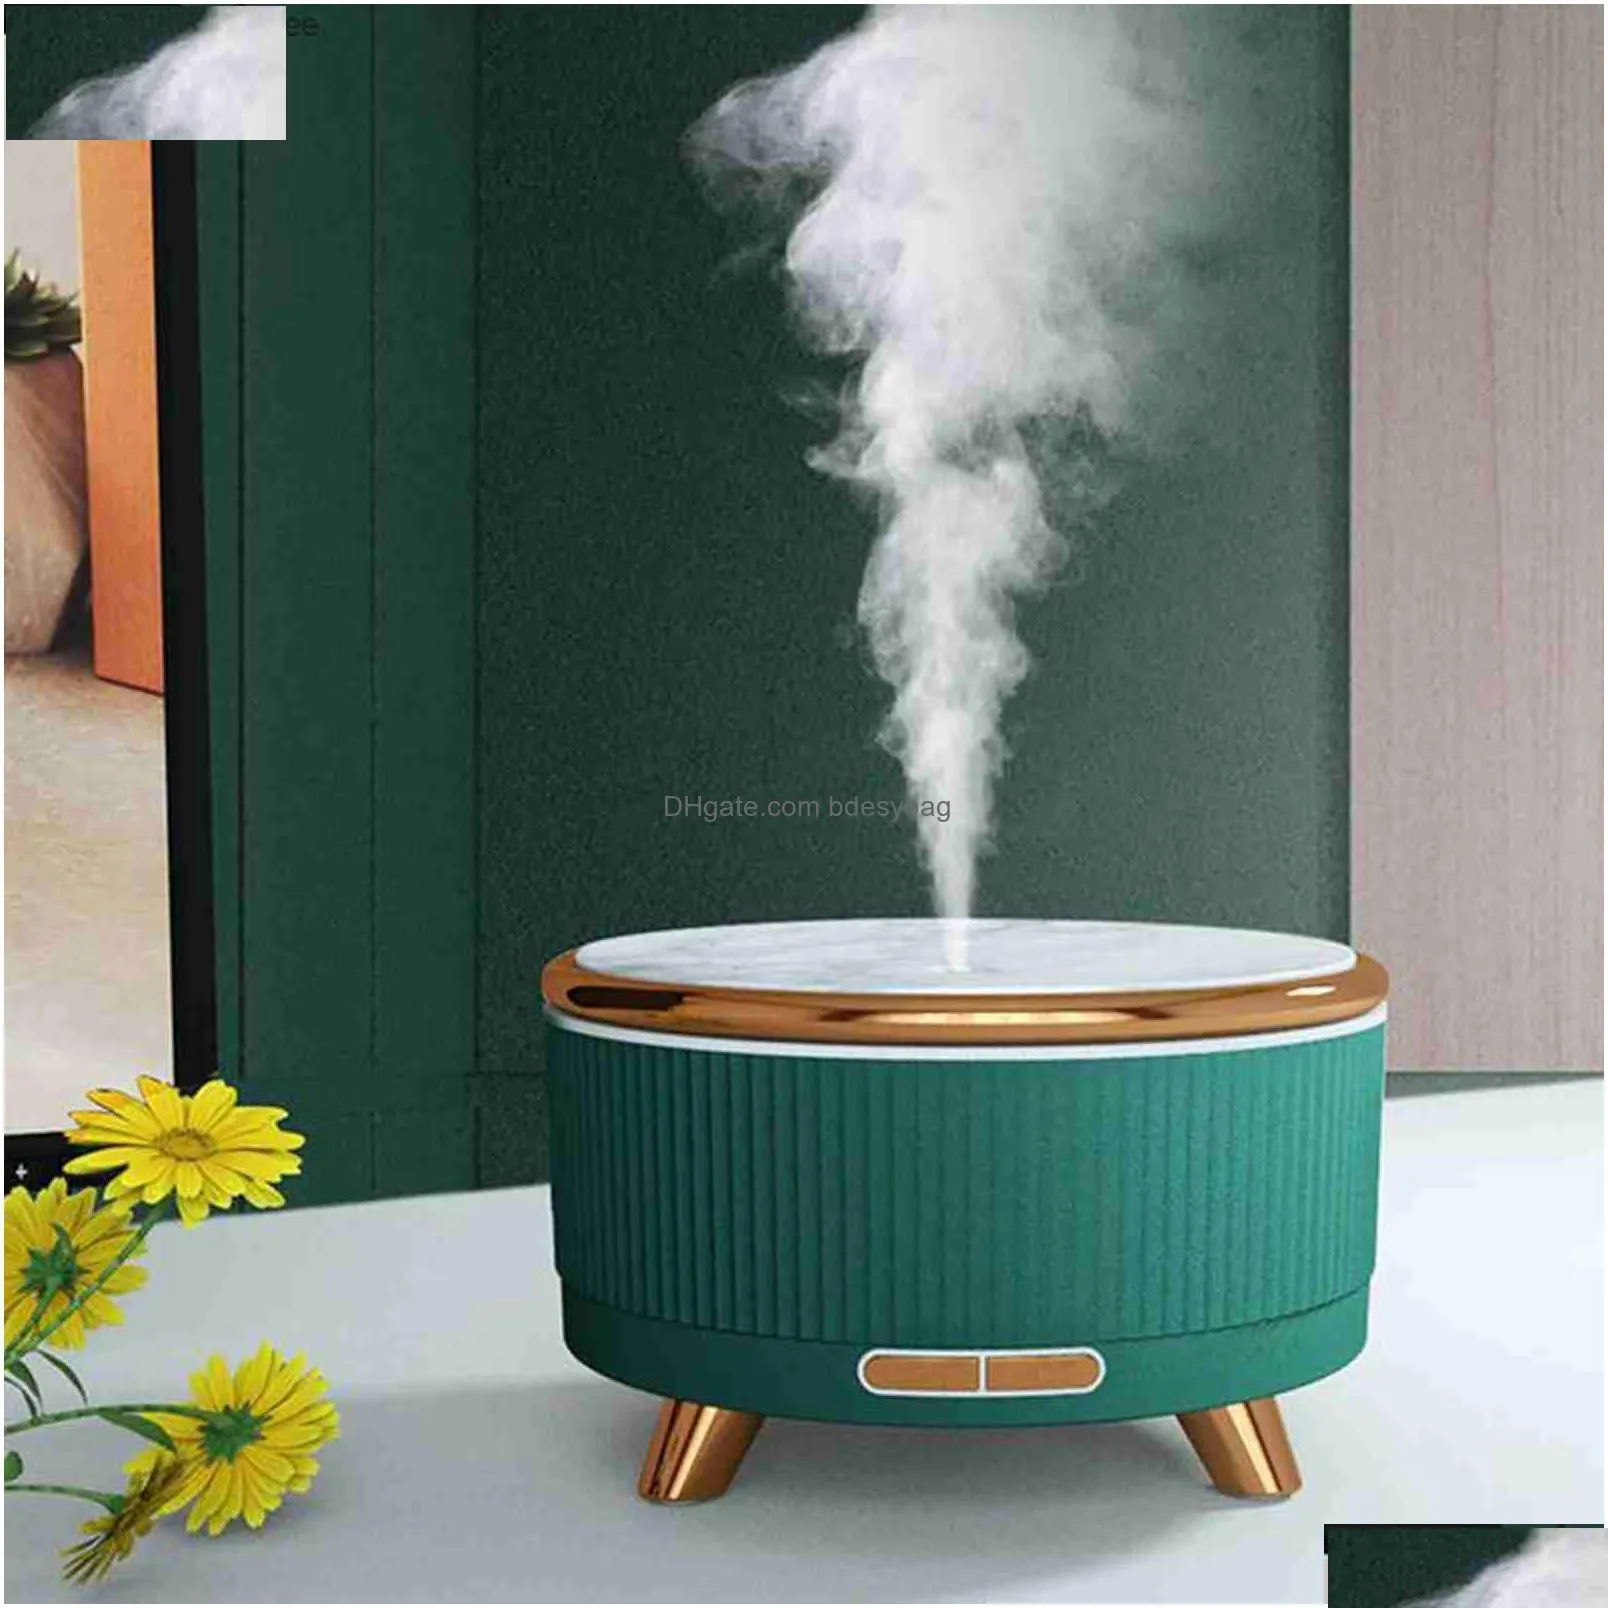 humidifiers nebulizing ultrasonic aromatherapy humidifier 7 led lights home fragrances antique style  oil diffuser for spa desktop